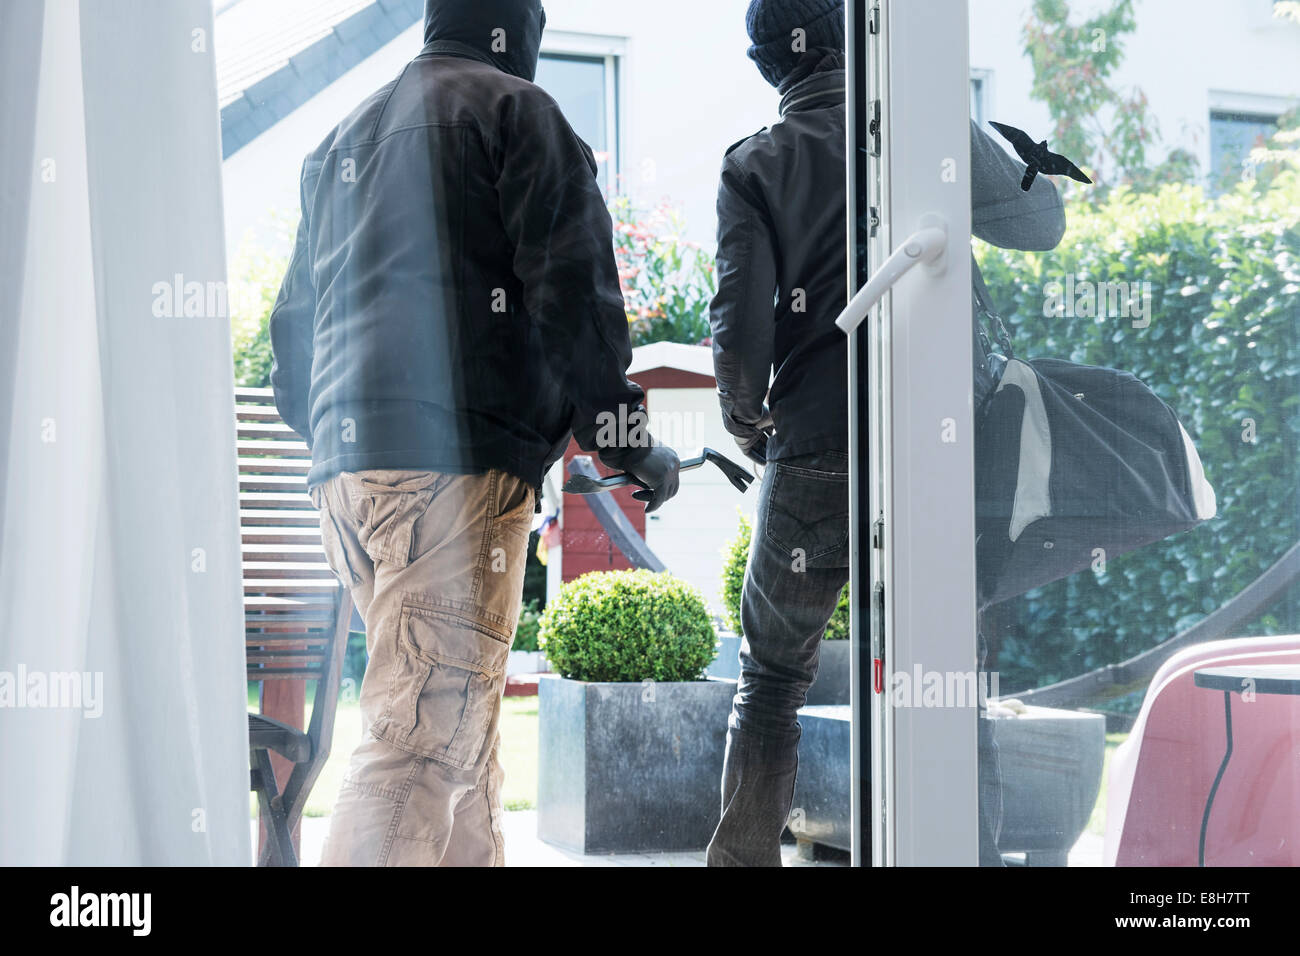 Two burglars leaving an one-family house with their loot at daytime Stock Photo